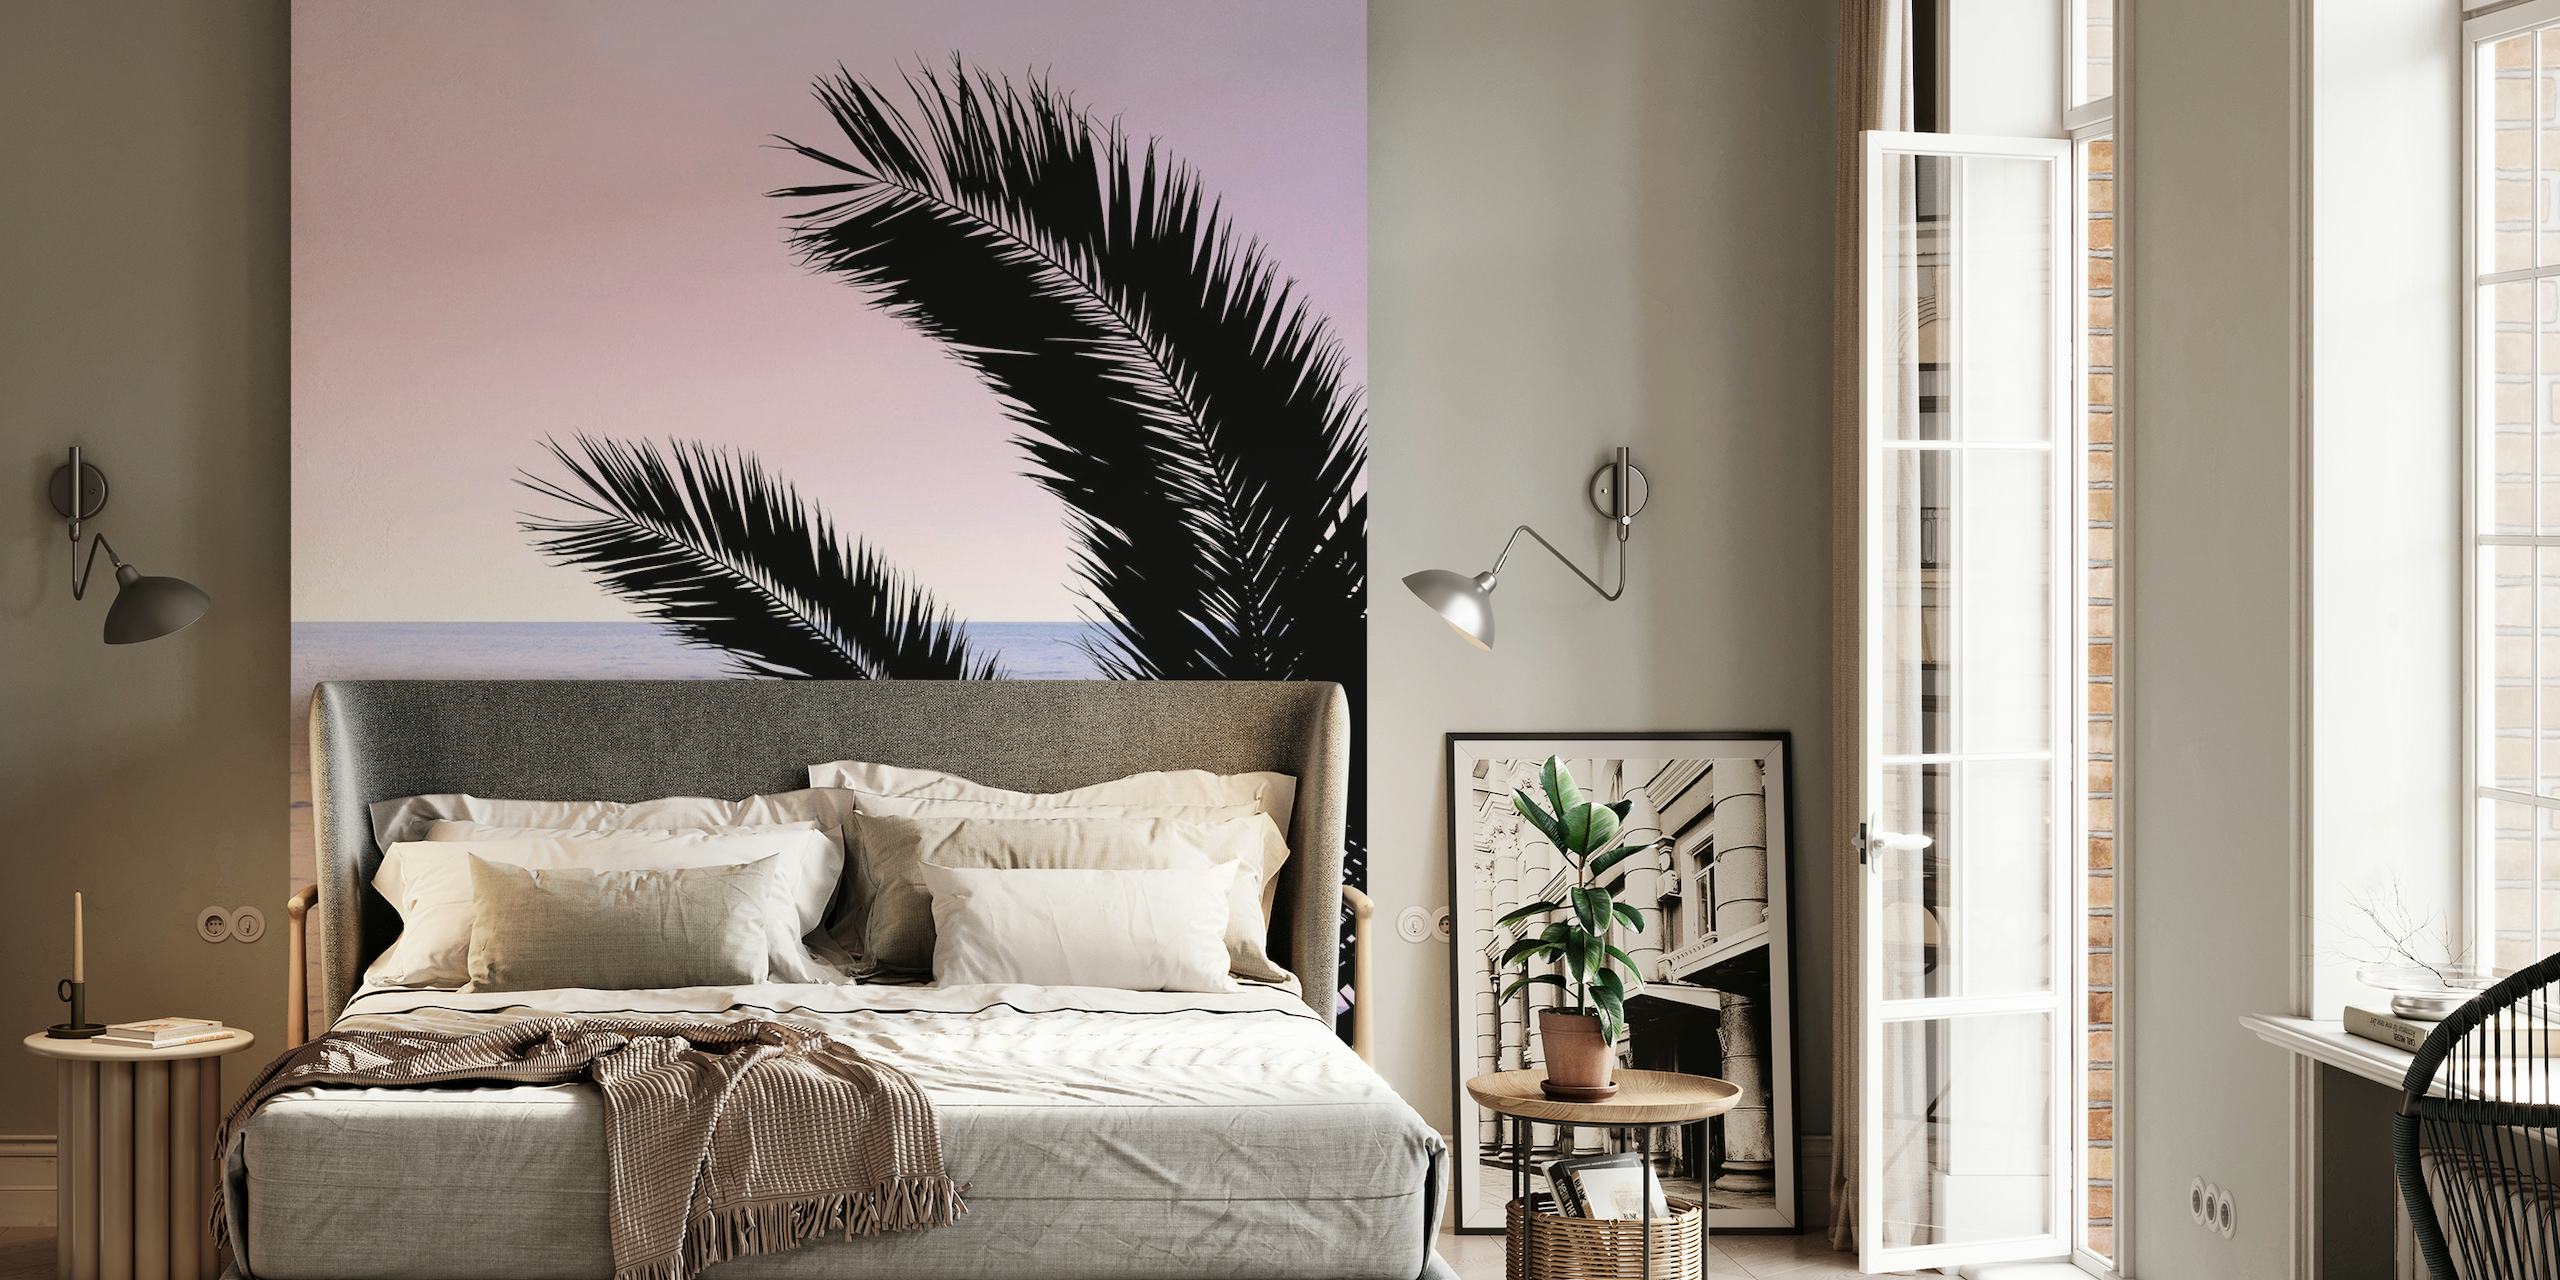 Silhouette of palm leaves with a pink and purple sunset over the ocean in the Palm Ocean Dream 1 wall mural.